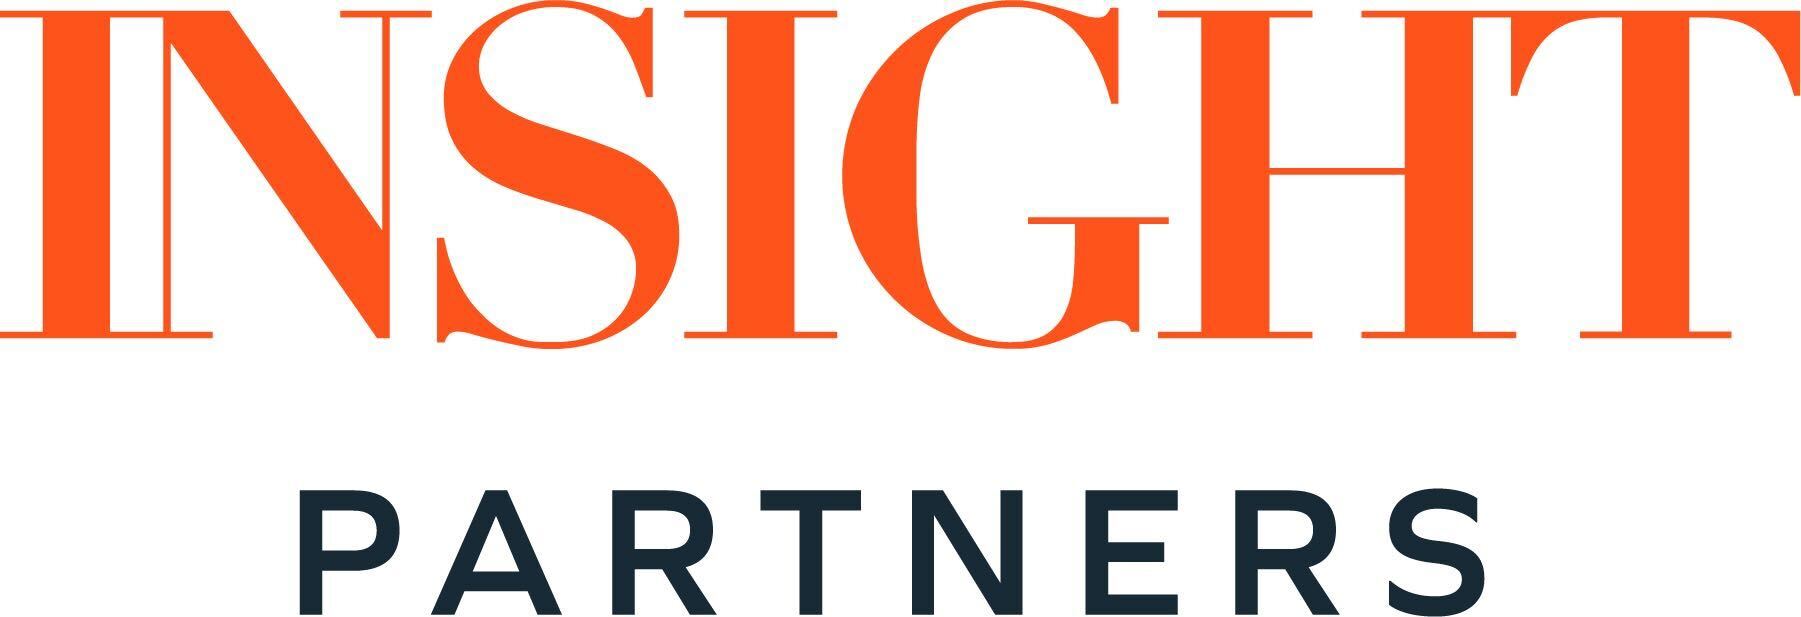 About: Insight partners